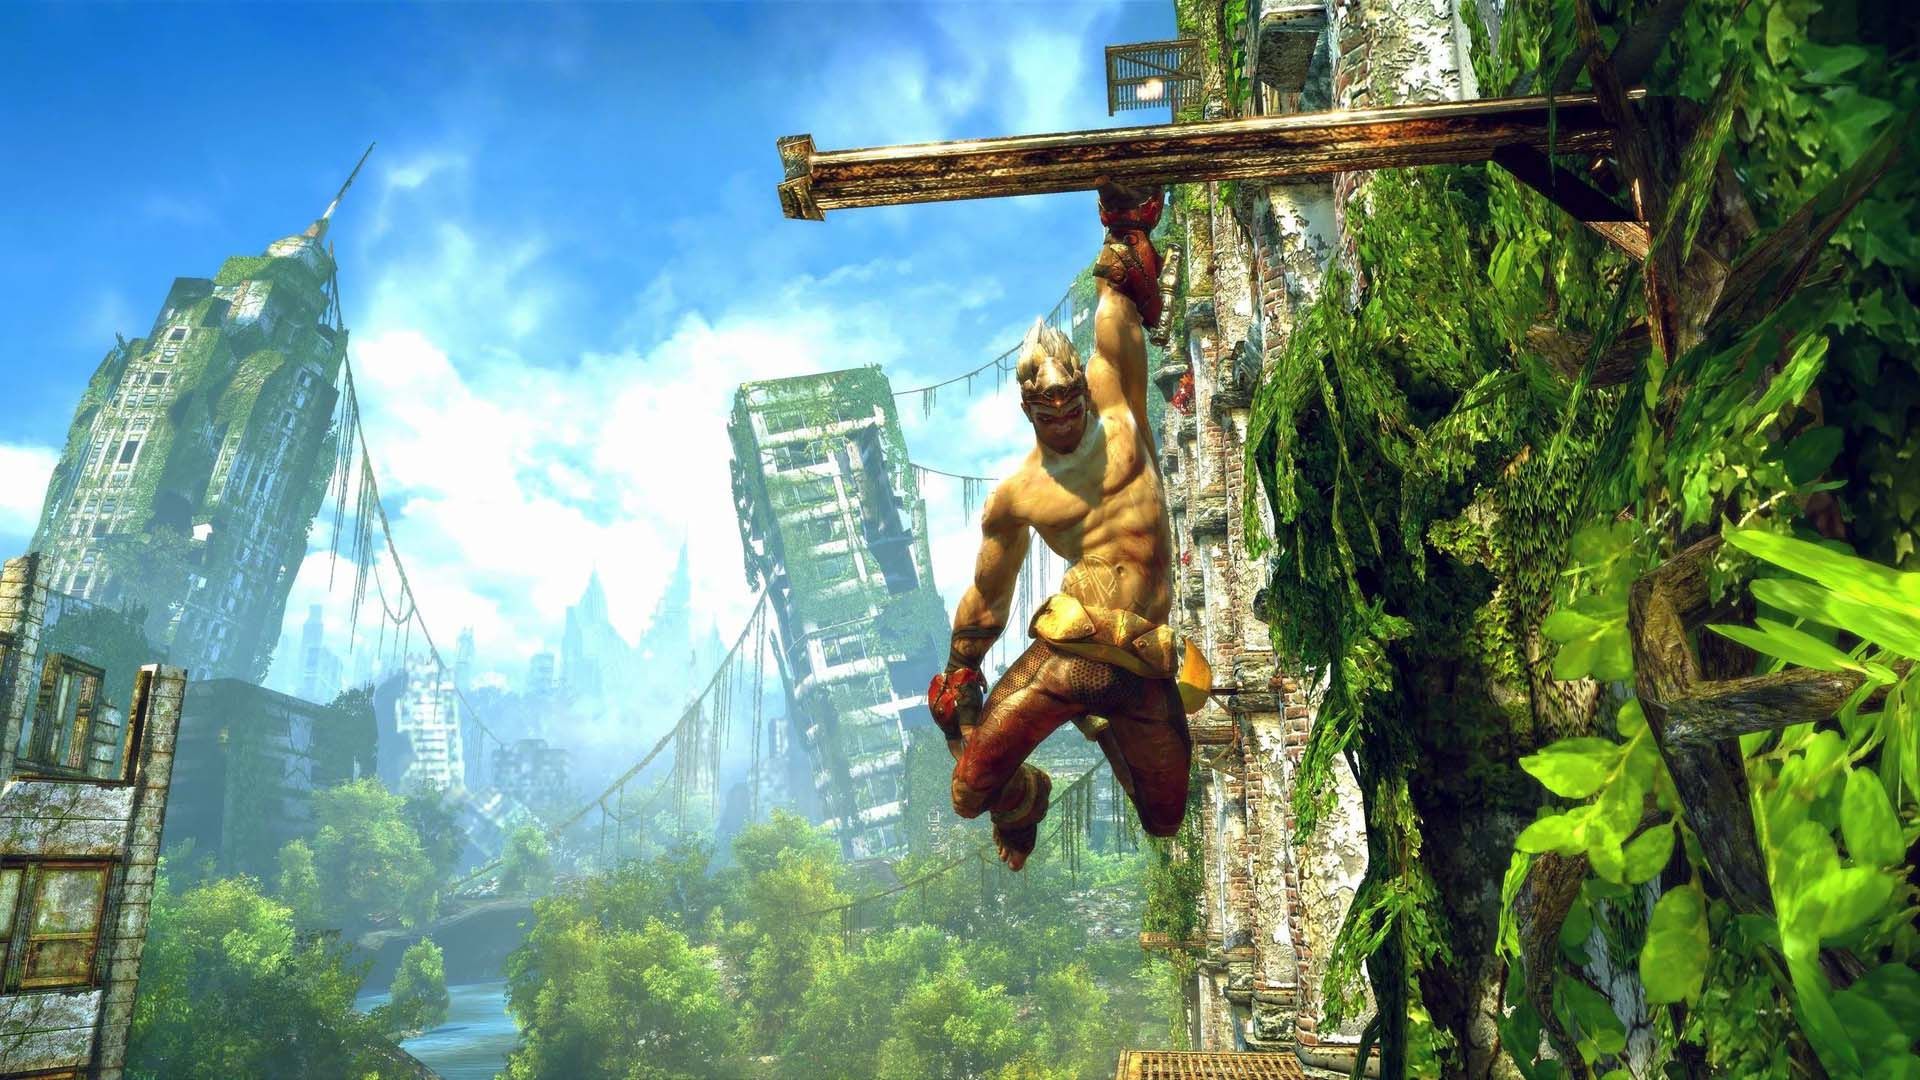 Enslaved Odyssey To The West Wallpaper - Enslaved Odyssey To The West Gif - HD Wallpaper 